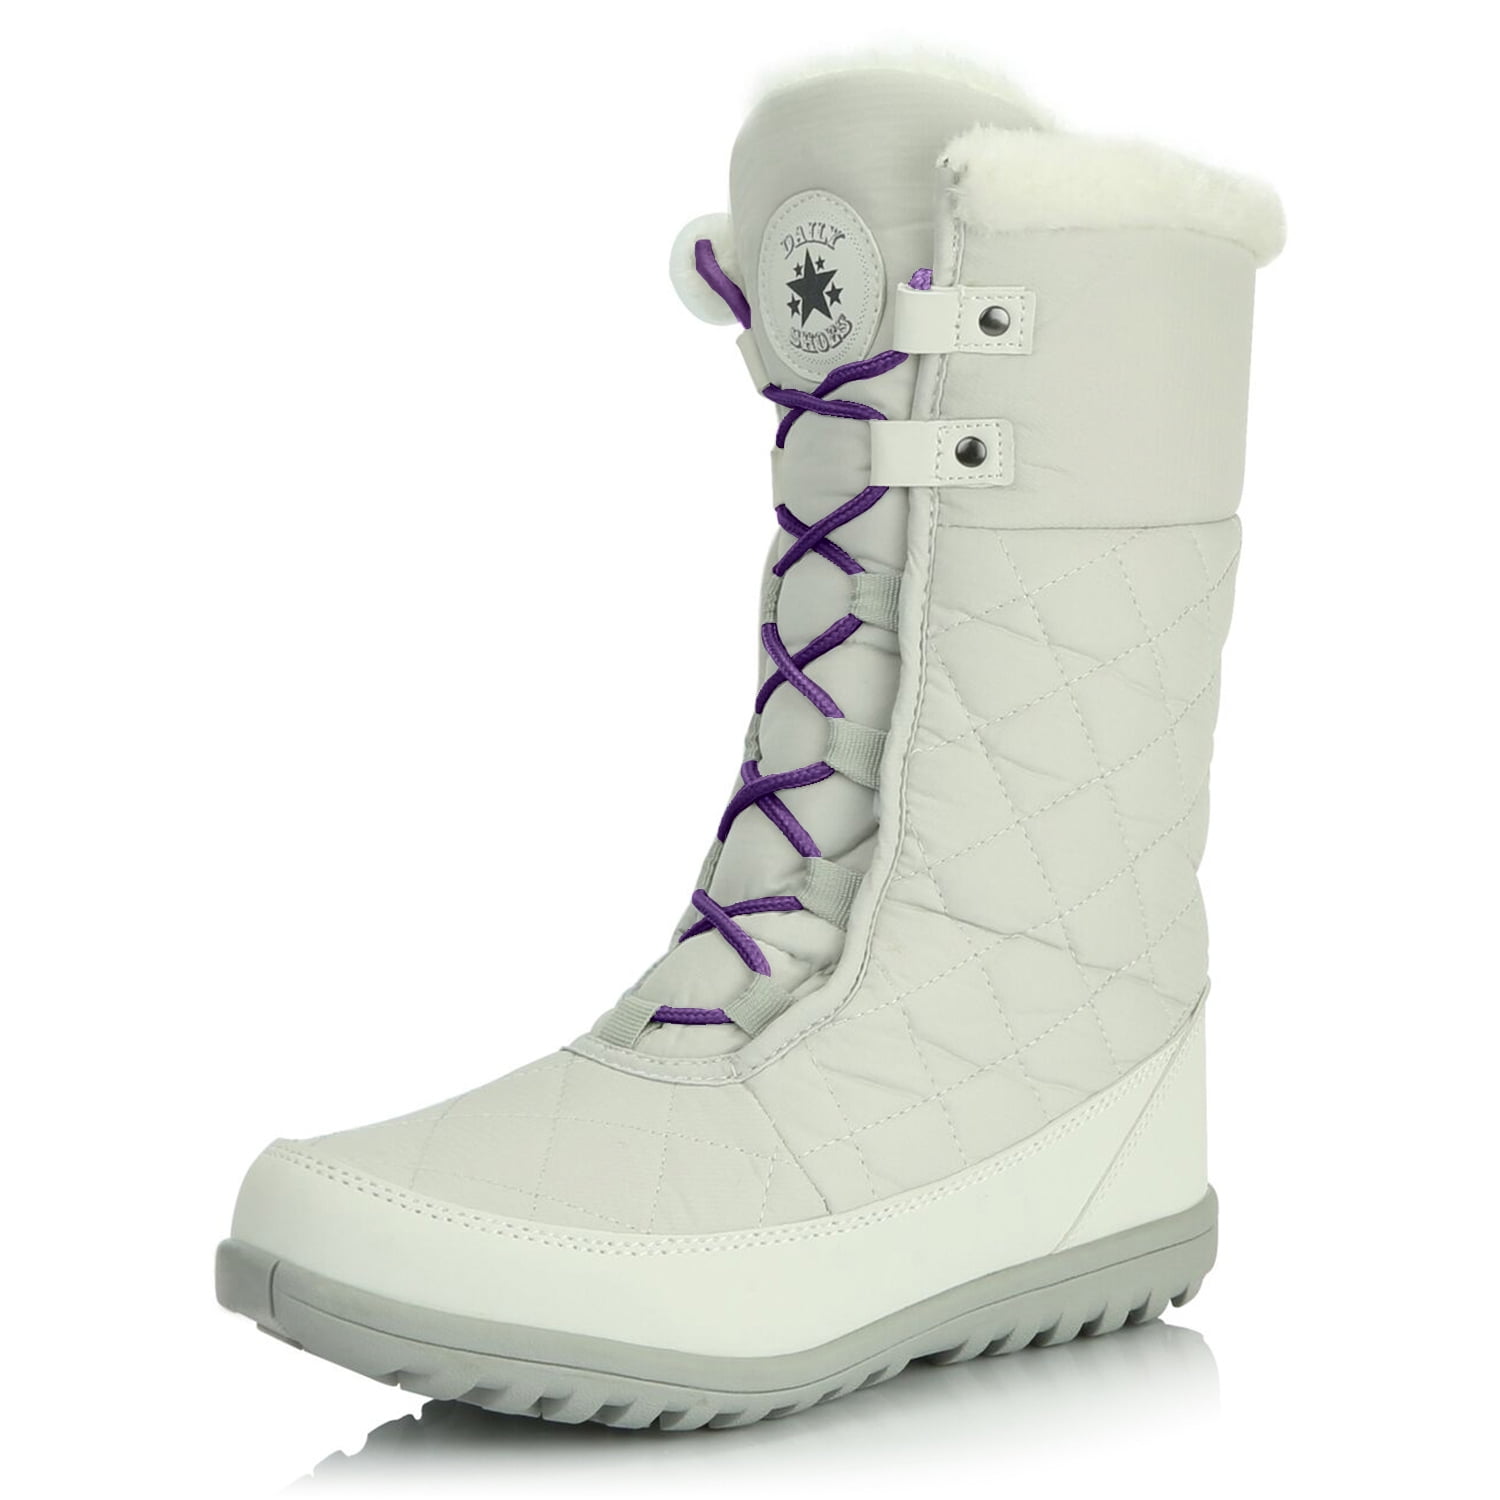 Embryo pork yours DailyShoes Snow Boots Store Women's Comfort Round Toe Snow Boots Winter  Warm Ankle Short Quilt Lace Up Outdoor Work High Eskimo Fur White,Nylon,13,  Shoelace Style Purple - Walmart.com